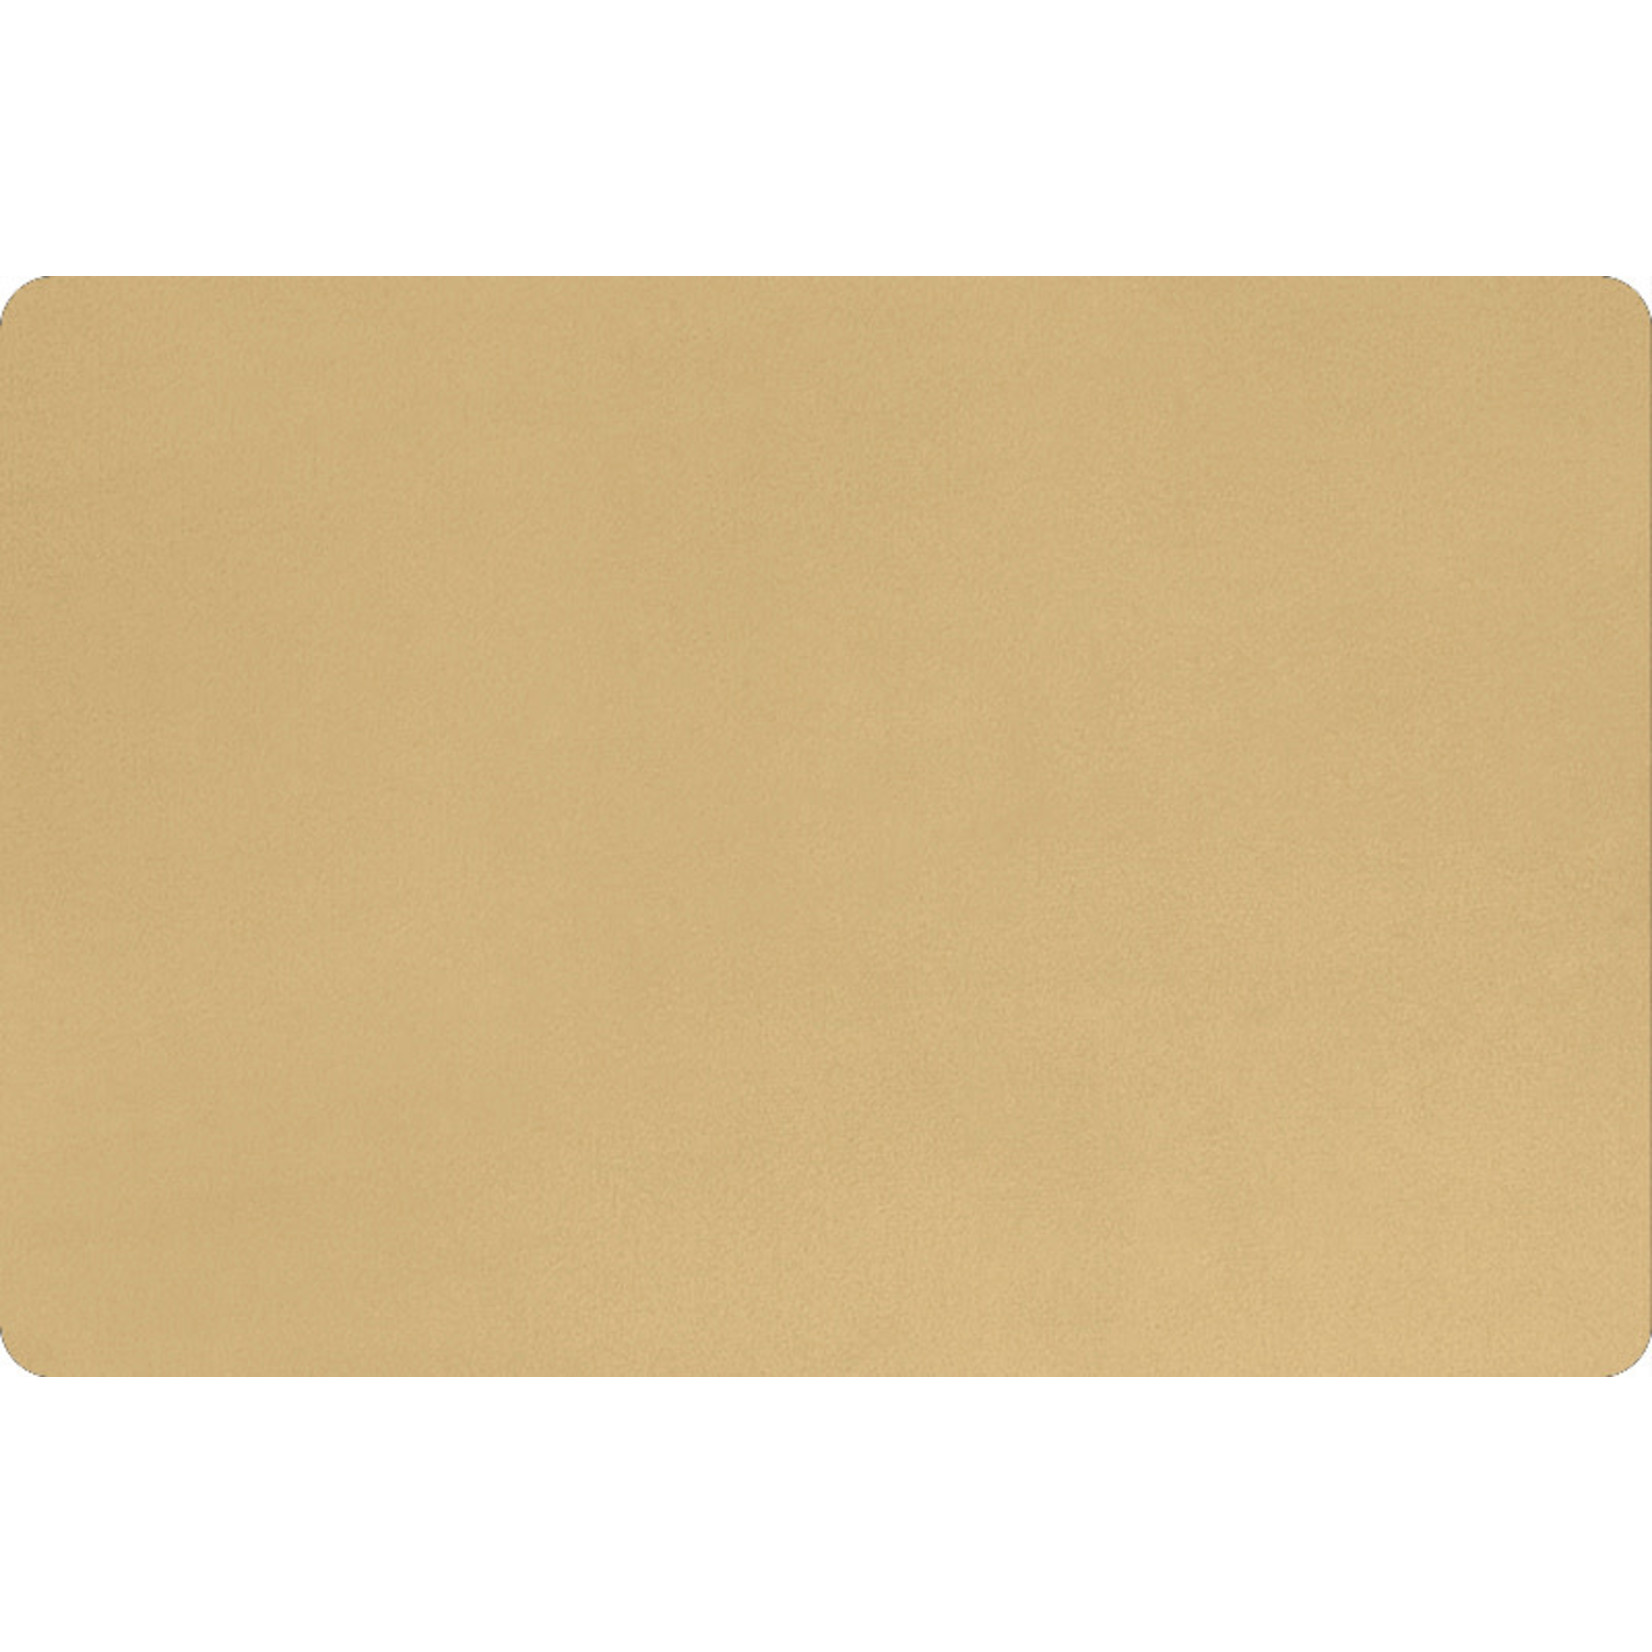 Shannon Fabrics Minky, Extra Wide Solid Cuddle3, 90" Camel, (by the inch)